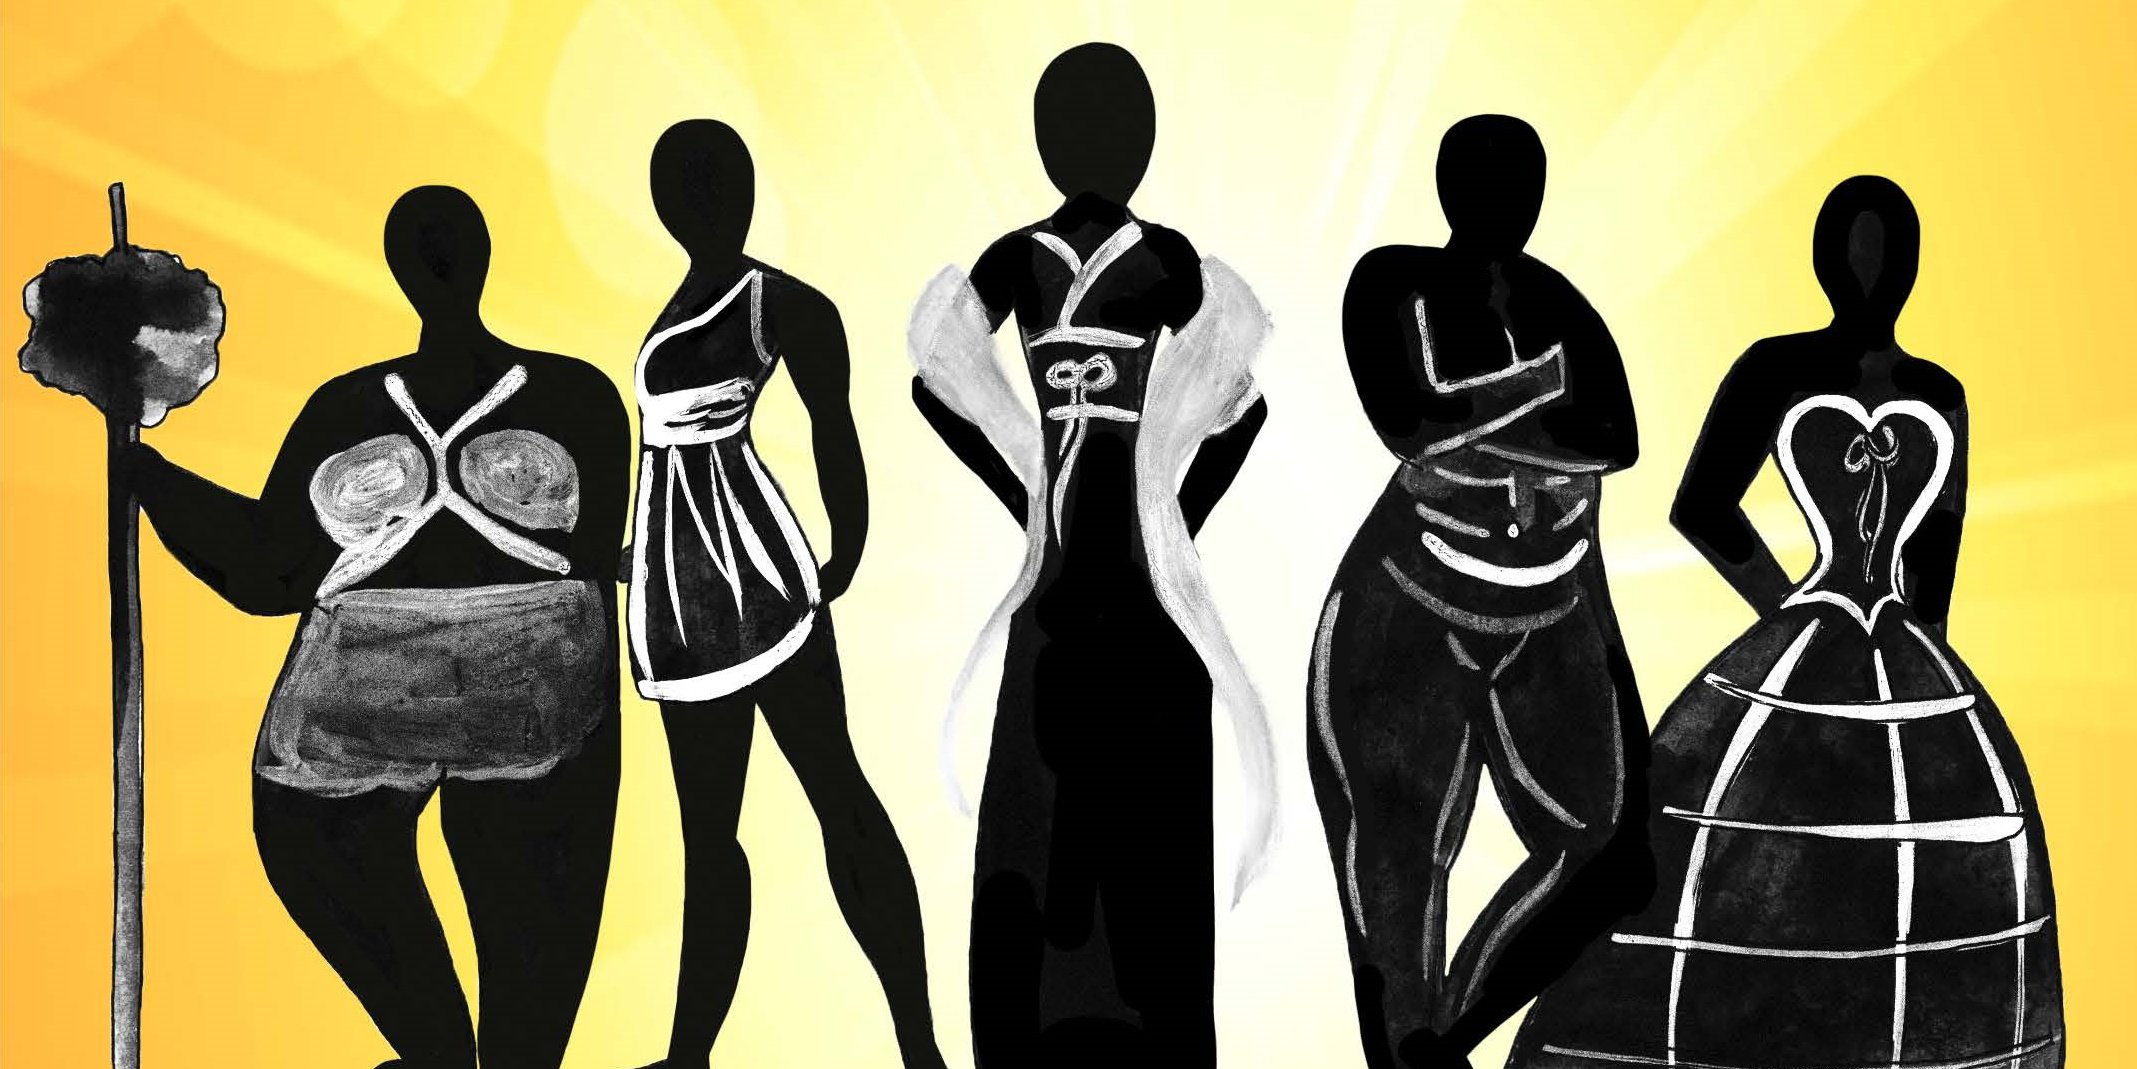 Beauty Standards: See How Body Types Change Through History